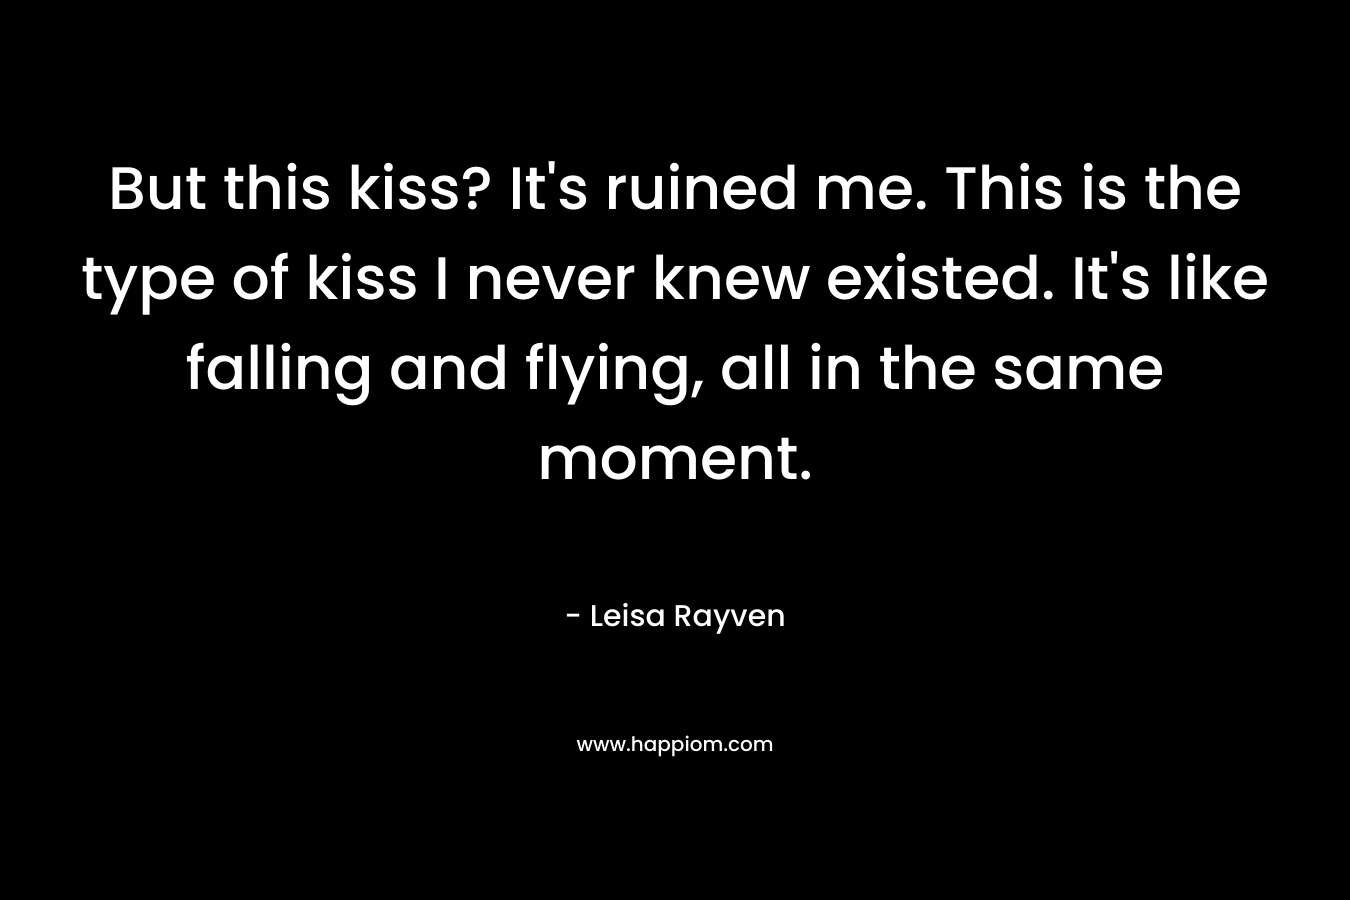 But this kiss? It’s ruined me. This is the type of kiss I never knew existed. It’s like falling and flying, all in the same moment. – Leisa Rayven